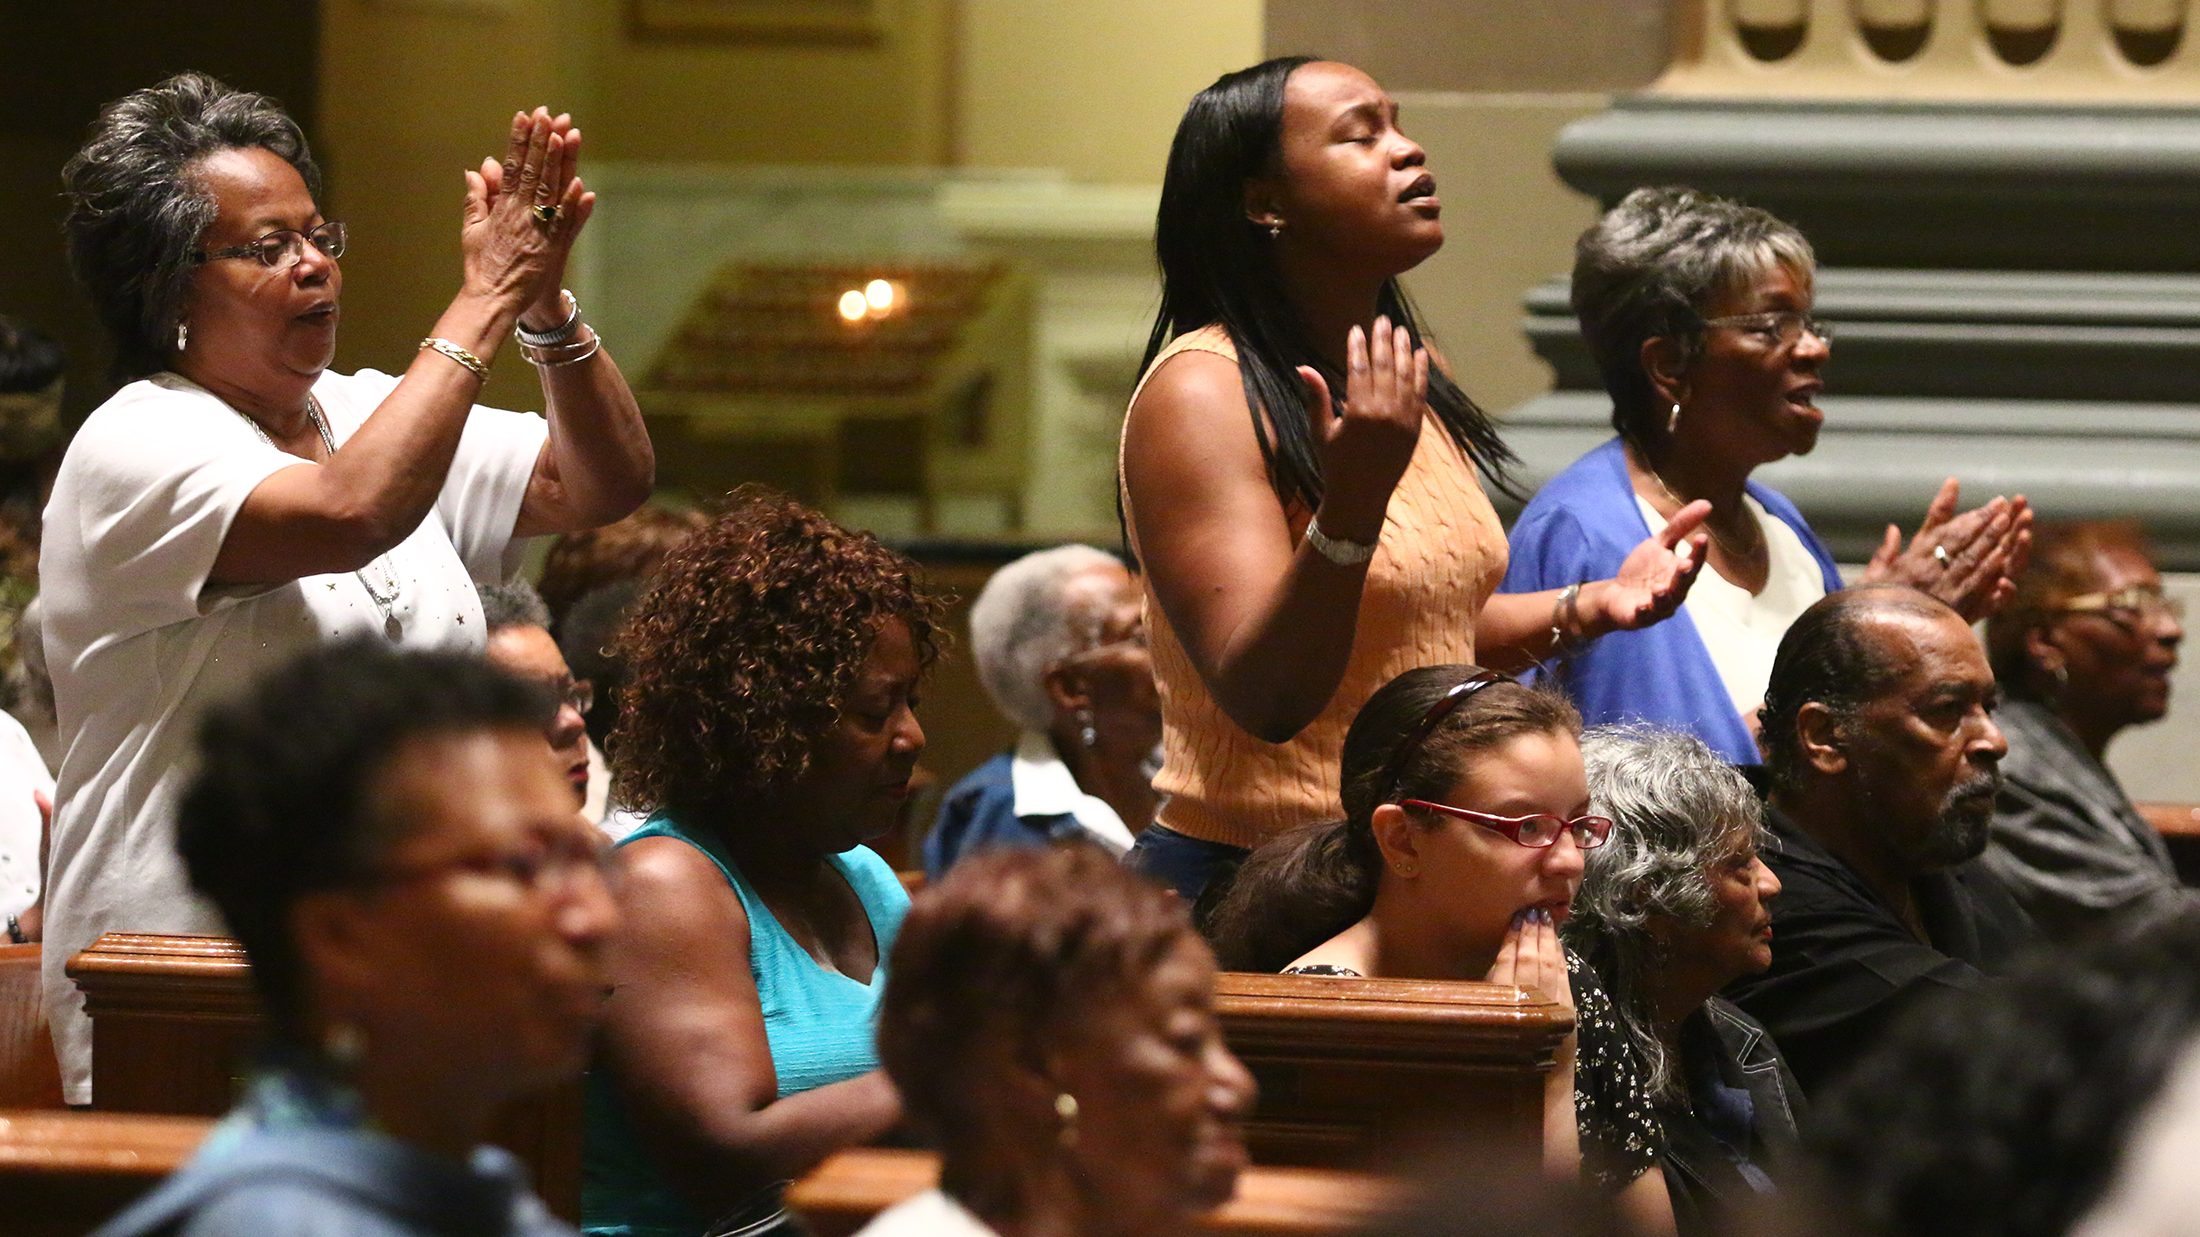 Black Catholic spirituality a force in fight against racism, say pastors